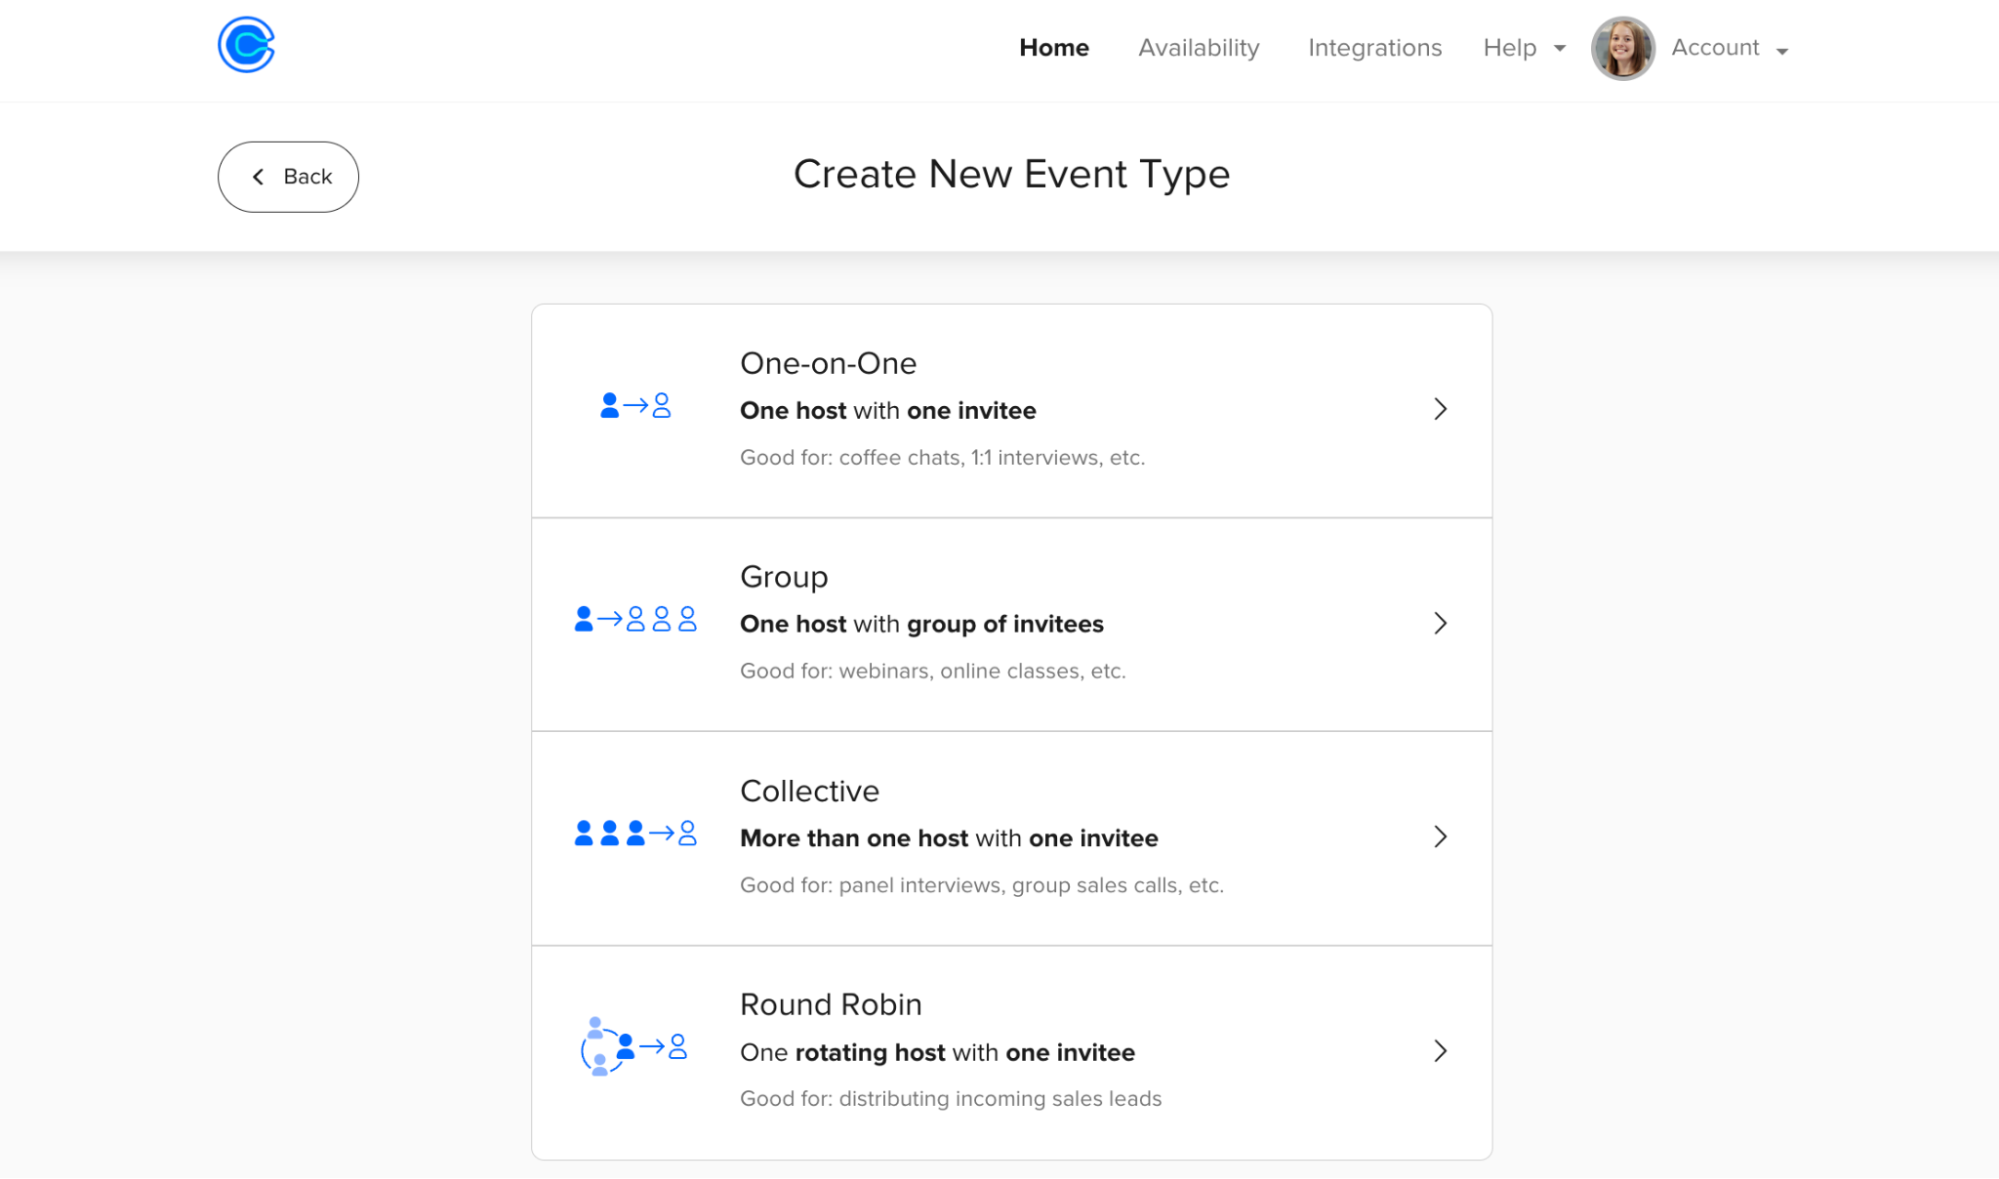 Screenshot of the "Create New Event Type" page in Calendly showing Event Types: One-on-One, Group, Collective, and Round Robin.